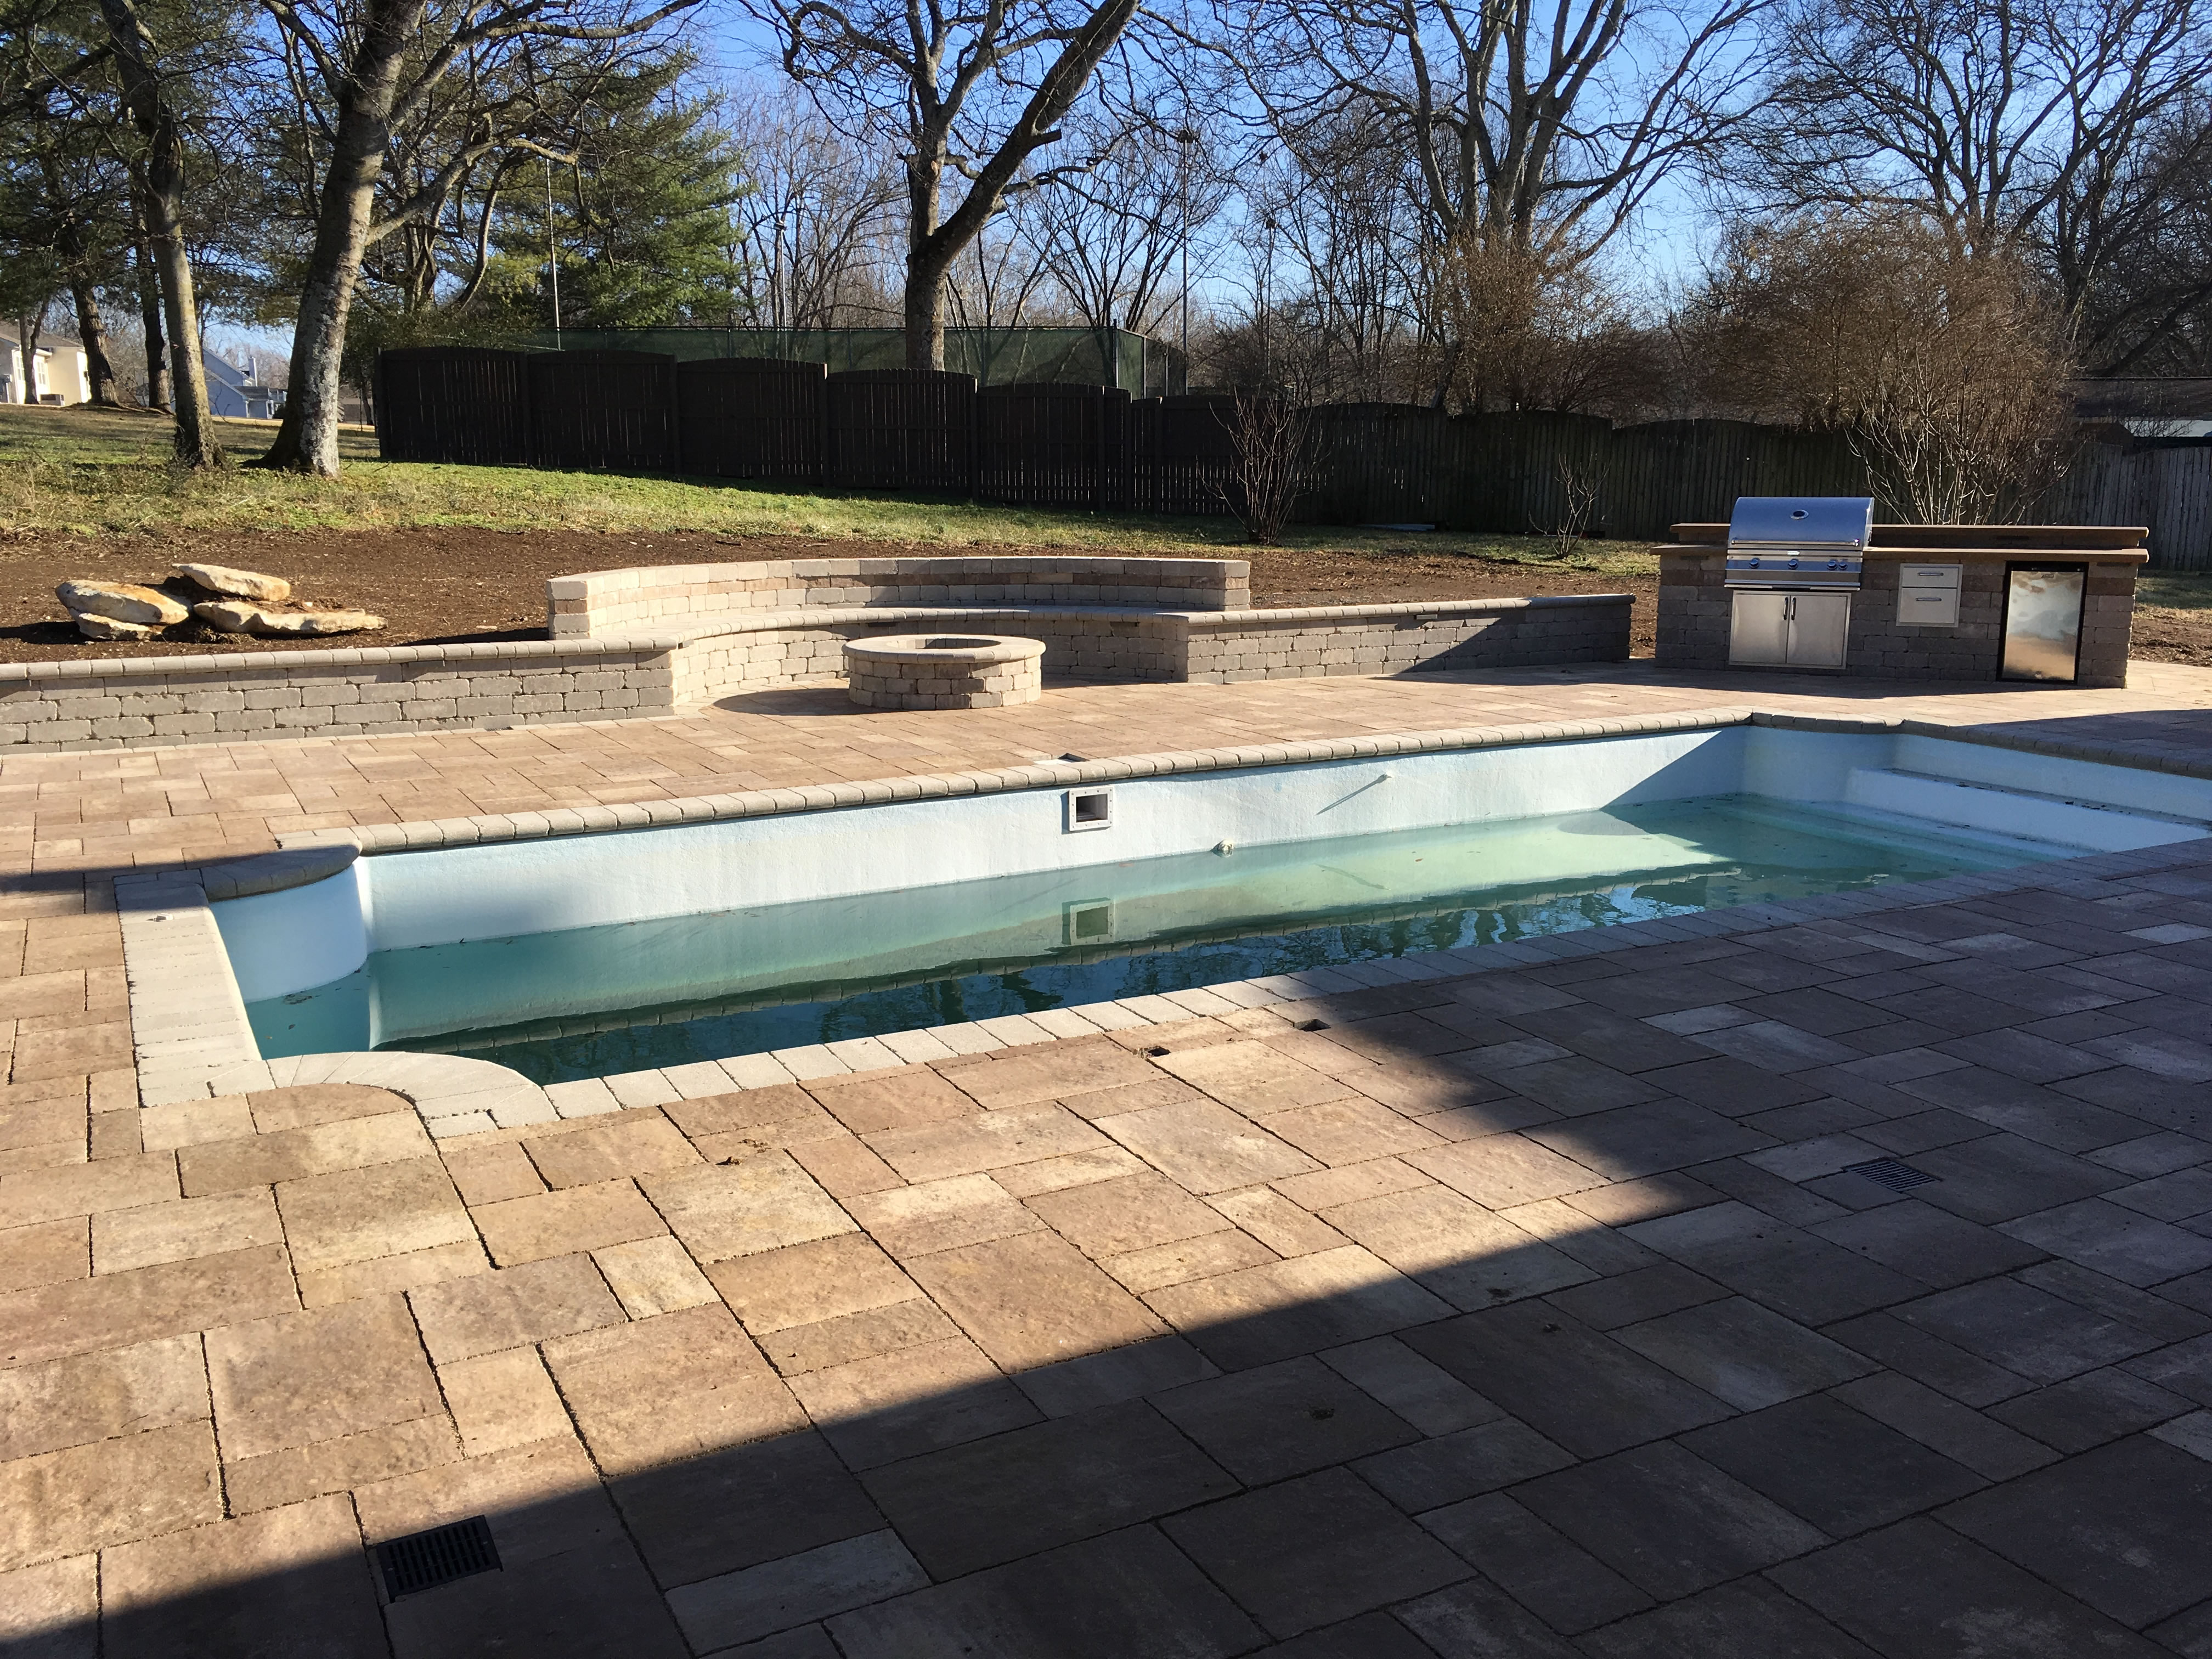 Paver patio, pool deck, outdoor firepit and seating walls and grill.